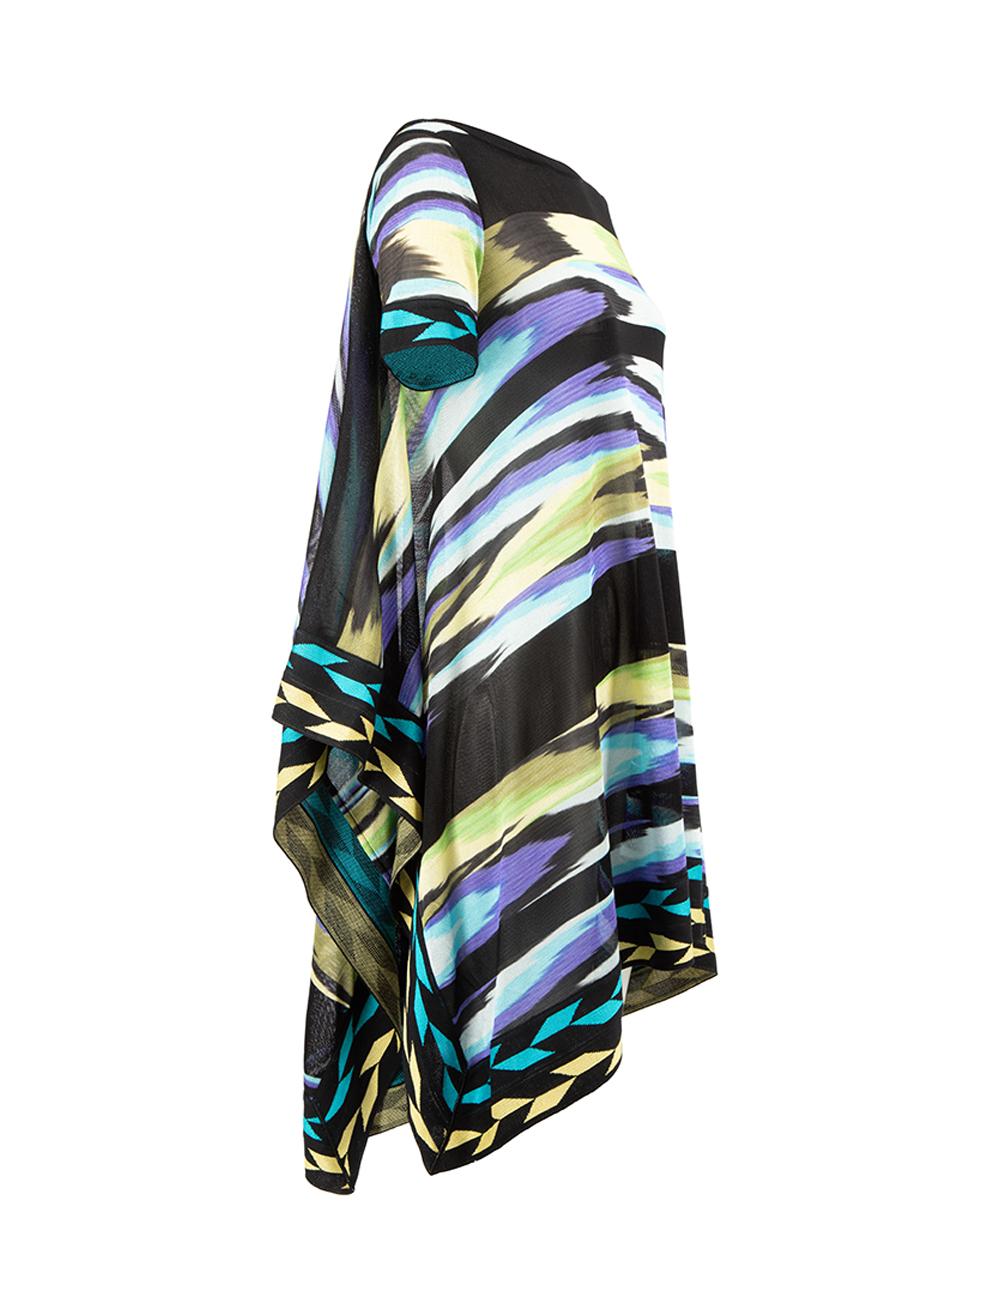 CONDITION is Never worn. No visible wear to dress is evident on this used Missoni designer resale item. 
 
 Details
  Multicolour
 Viscose
 Mini beach dress
 Cape like design
 Airbrush pattern
 Short sleeves
 
 
 Made in Italy
 
 Composition
 100%